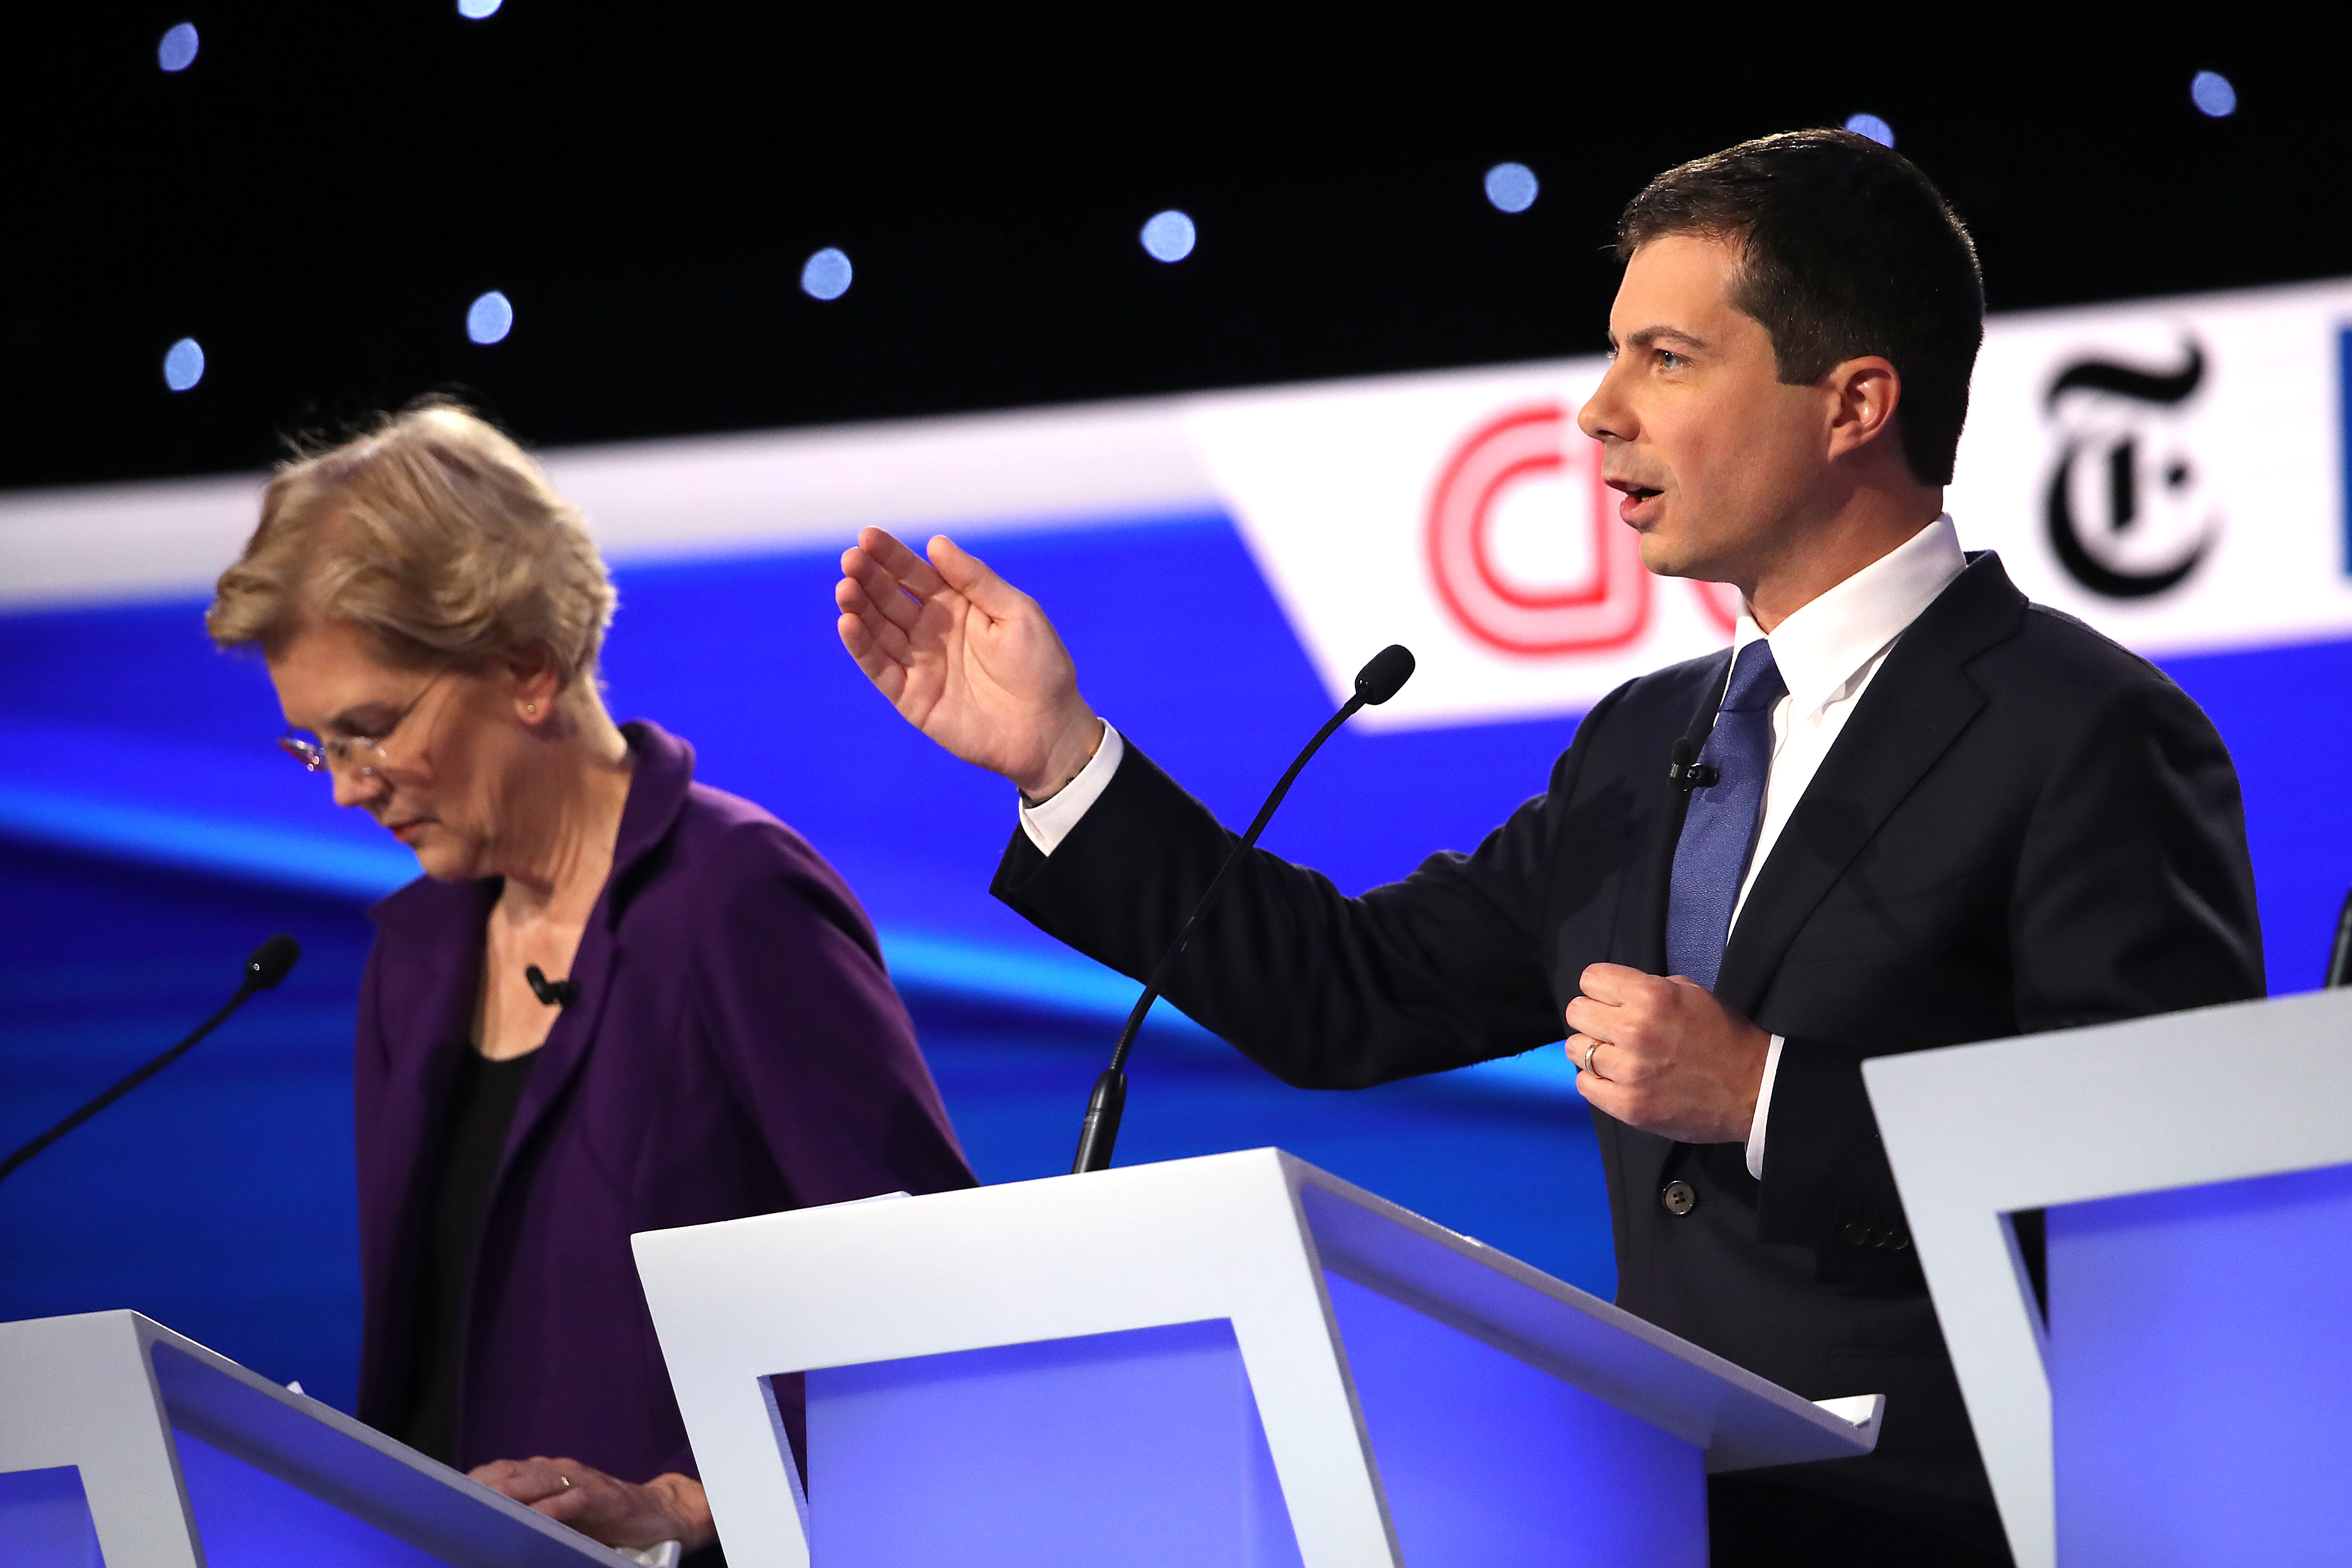 South Bend Mayor Pete Buttigieg speaks during the Democratic Presidential Debate at Otterbein University on October 15, 2019. (Win McNamee/Getty Images)